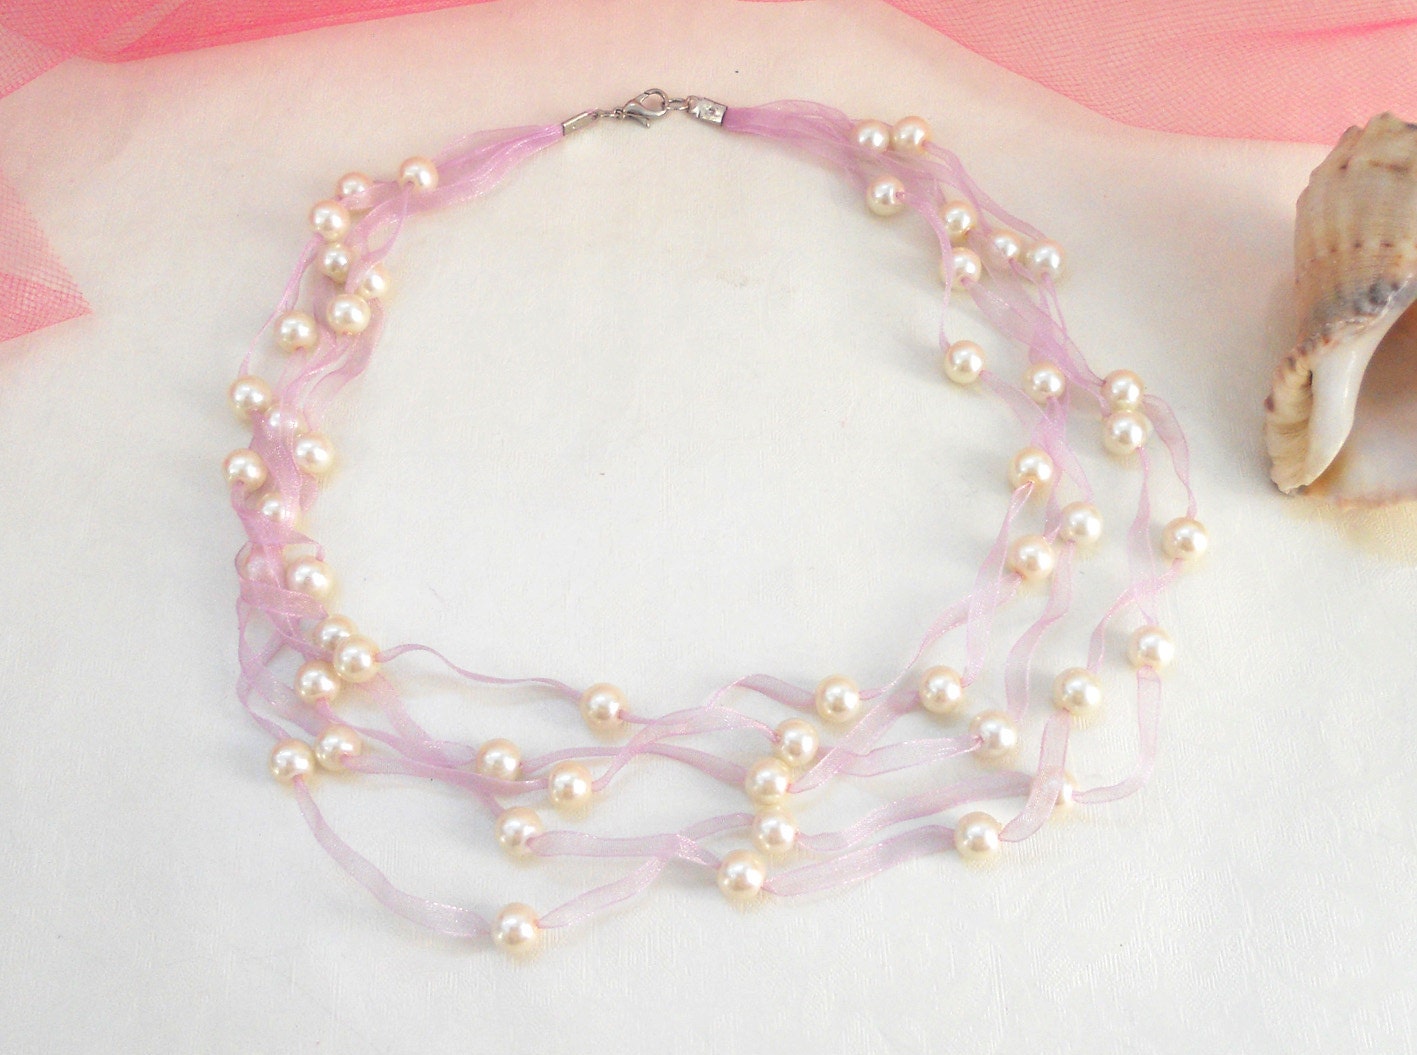 Pearl necklace - wedding - bridal - elegant - asteriascollection